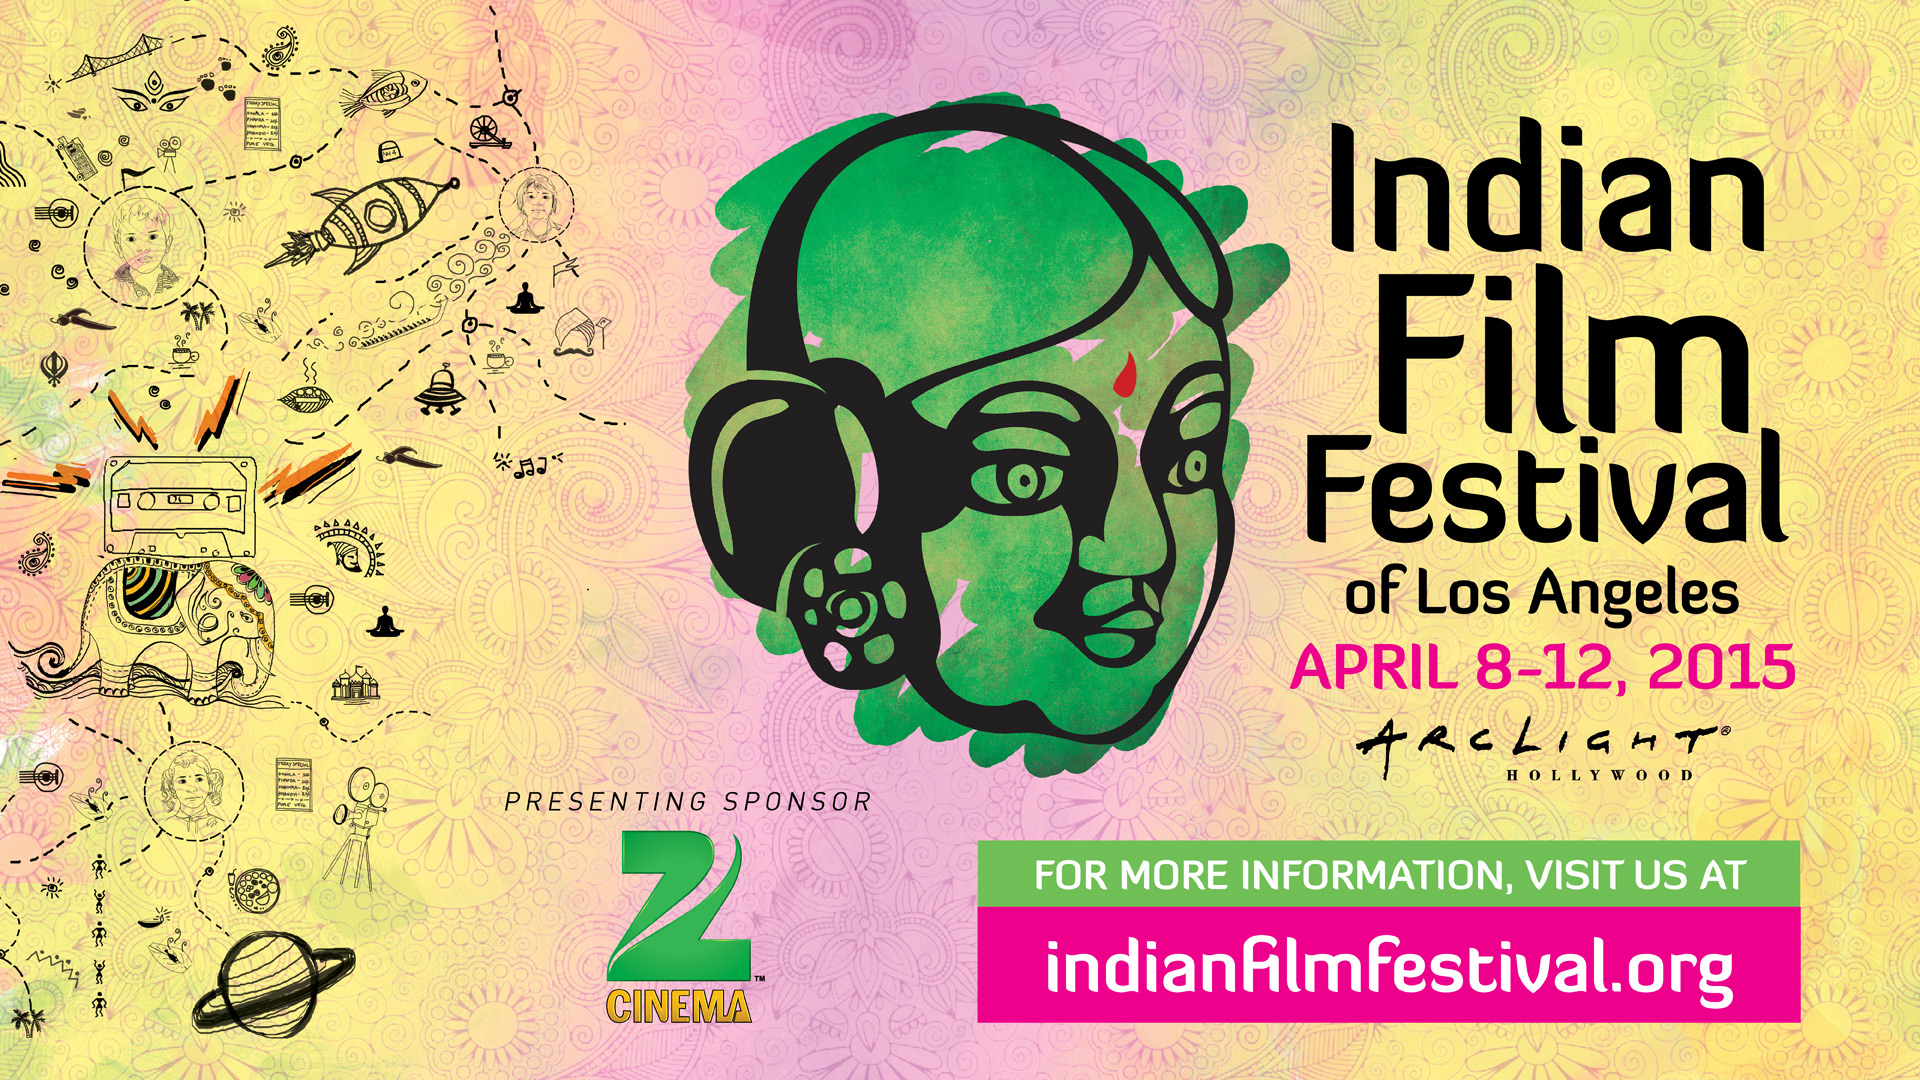 The 13th Annual Indian Film Festival Of Los Angeles Announces Film Line-Up